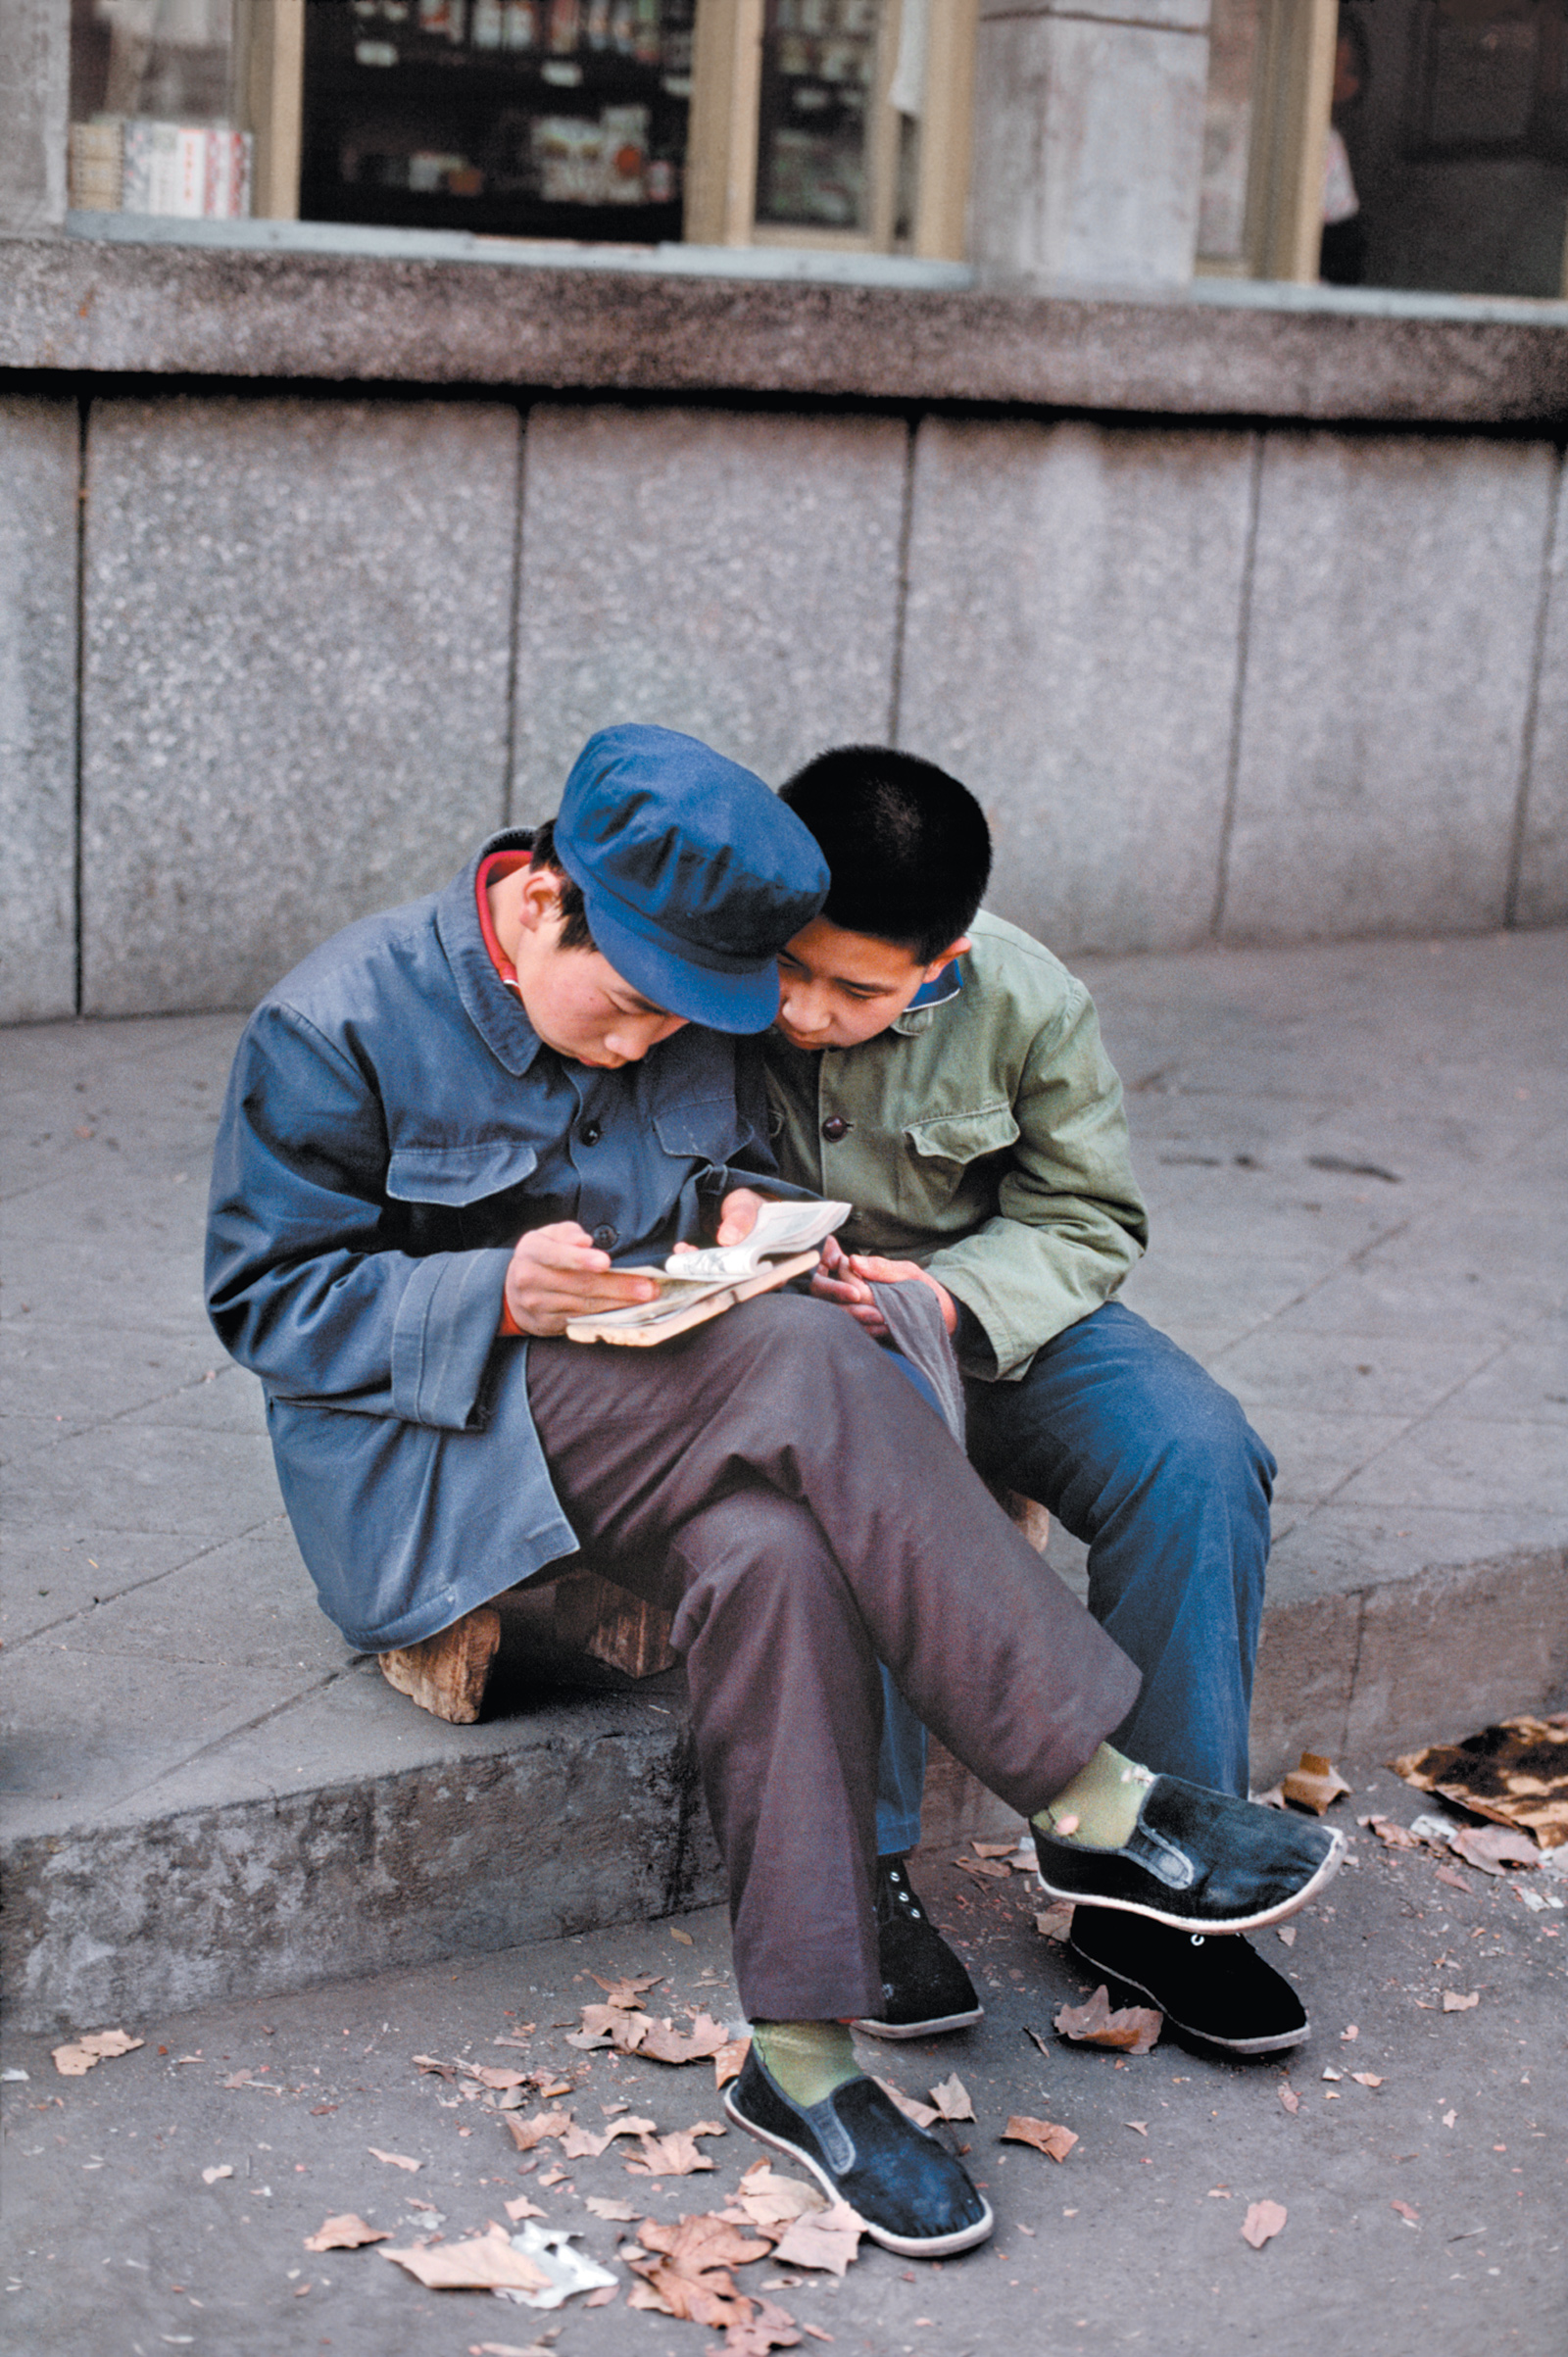 Beijing, 1984; photograph by Steve McCurry from his book On Reading, which includes a foreword by Paul Theroux and has just been published by Phaidon